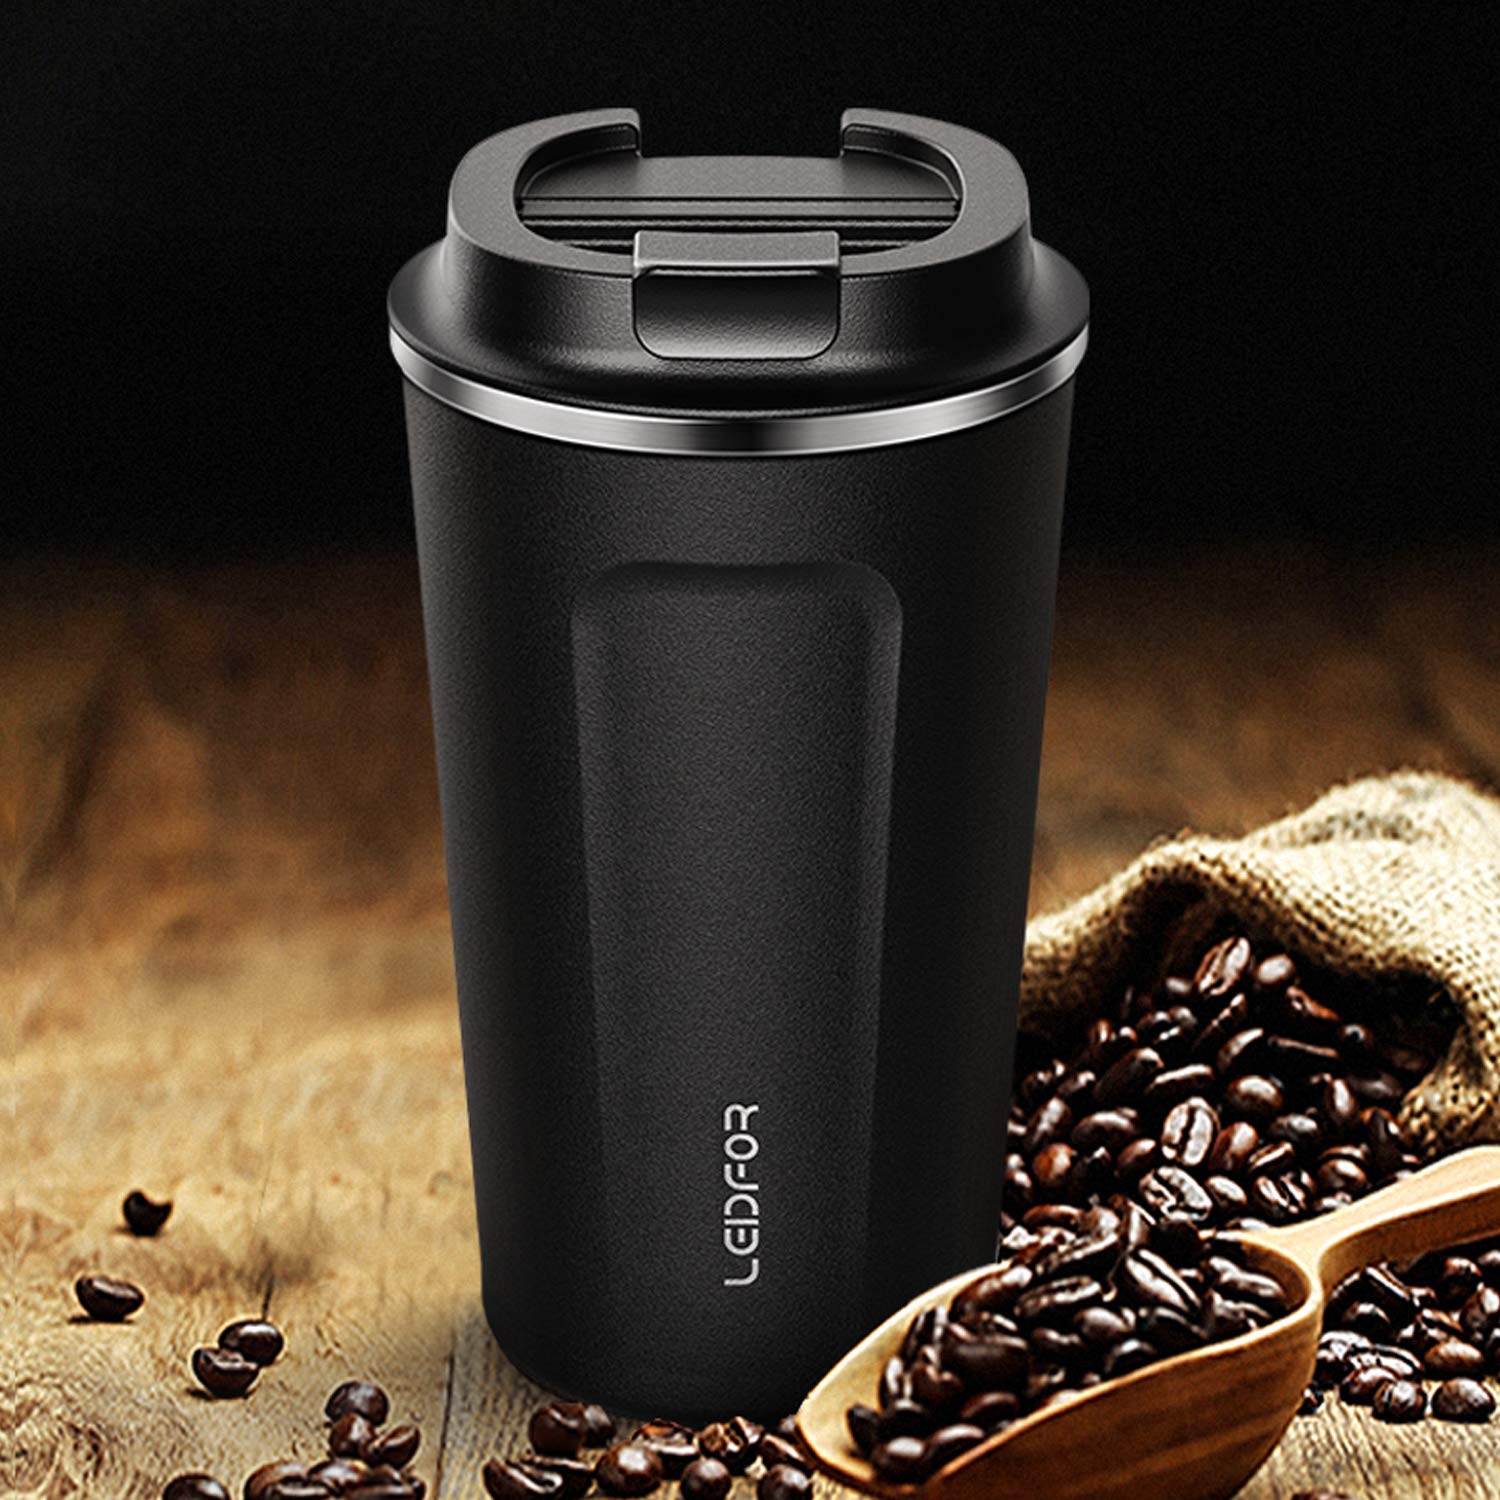 Leidfor Insulated Tumbler Coffee Travel Mug Vacuum Insulation Coffee Thermos Stainless Steel with Screw on Lid Leak proof BPA-Free 12 oz